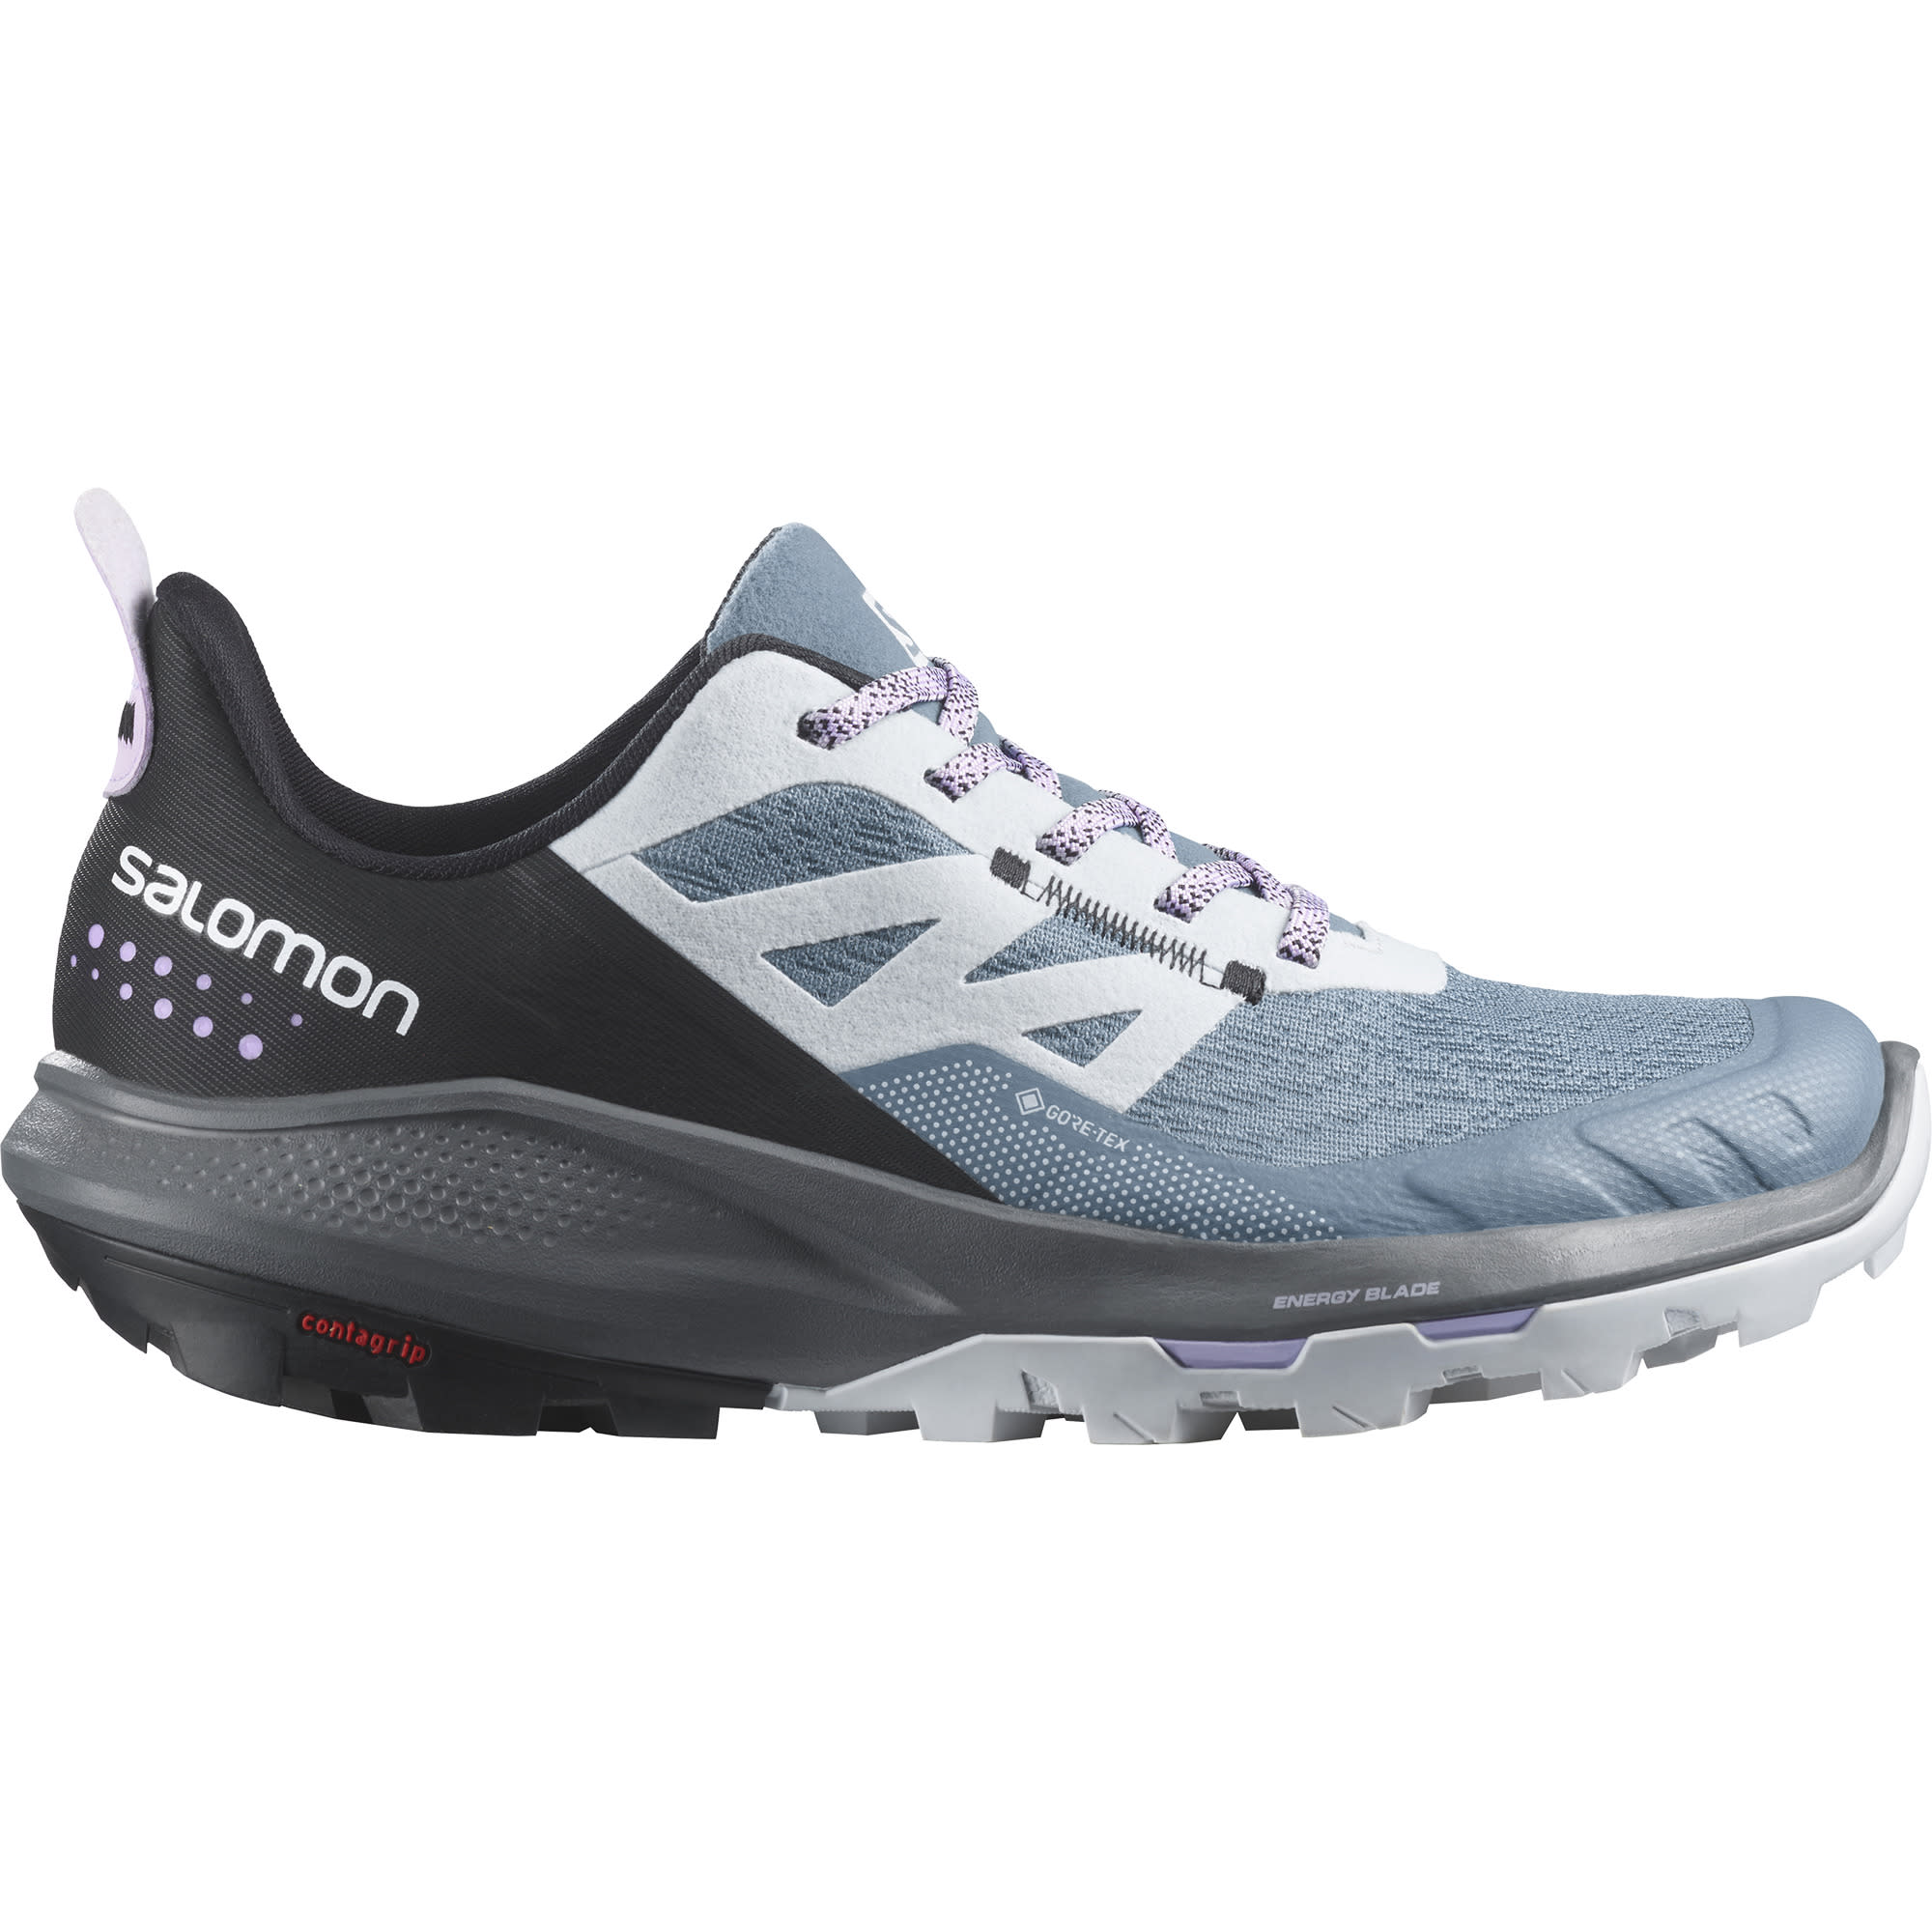 Women’s Outpulse GORE-TEX China Blue/Arctic Ice/Orchid Bloom